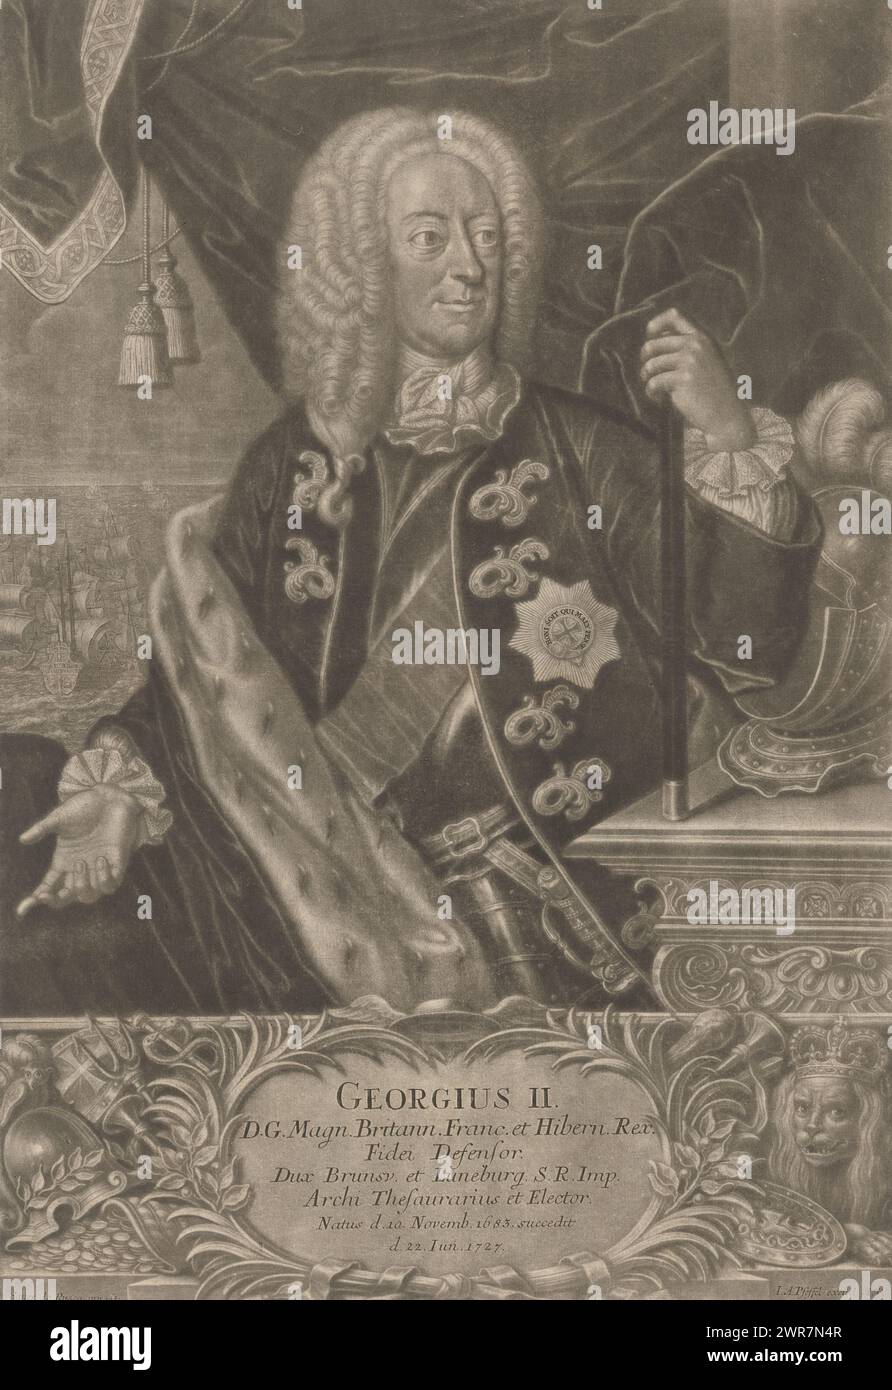 Portrait of George II, King of Great Britain, print maker: Johann Andreas Pfeffel (der Jüngere), (possibly), after painting by: Carlo Francesco Rusca, publisher: Johann Andreas Pfeffel (der Jüngere), Augsburg, 1727 - 1768, paper, height 483 mm × width 330 mm, print Stock Photo